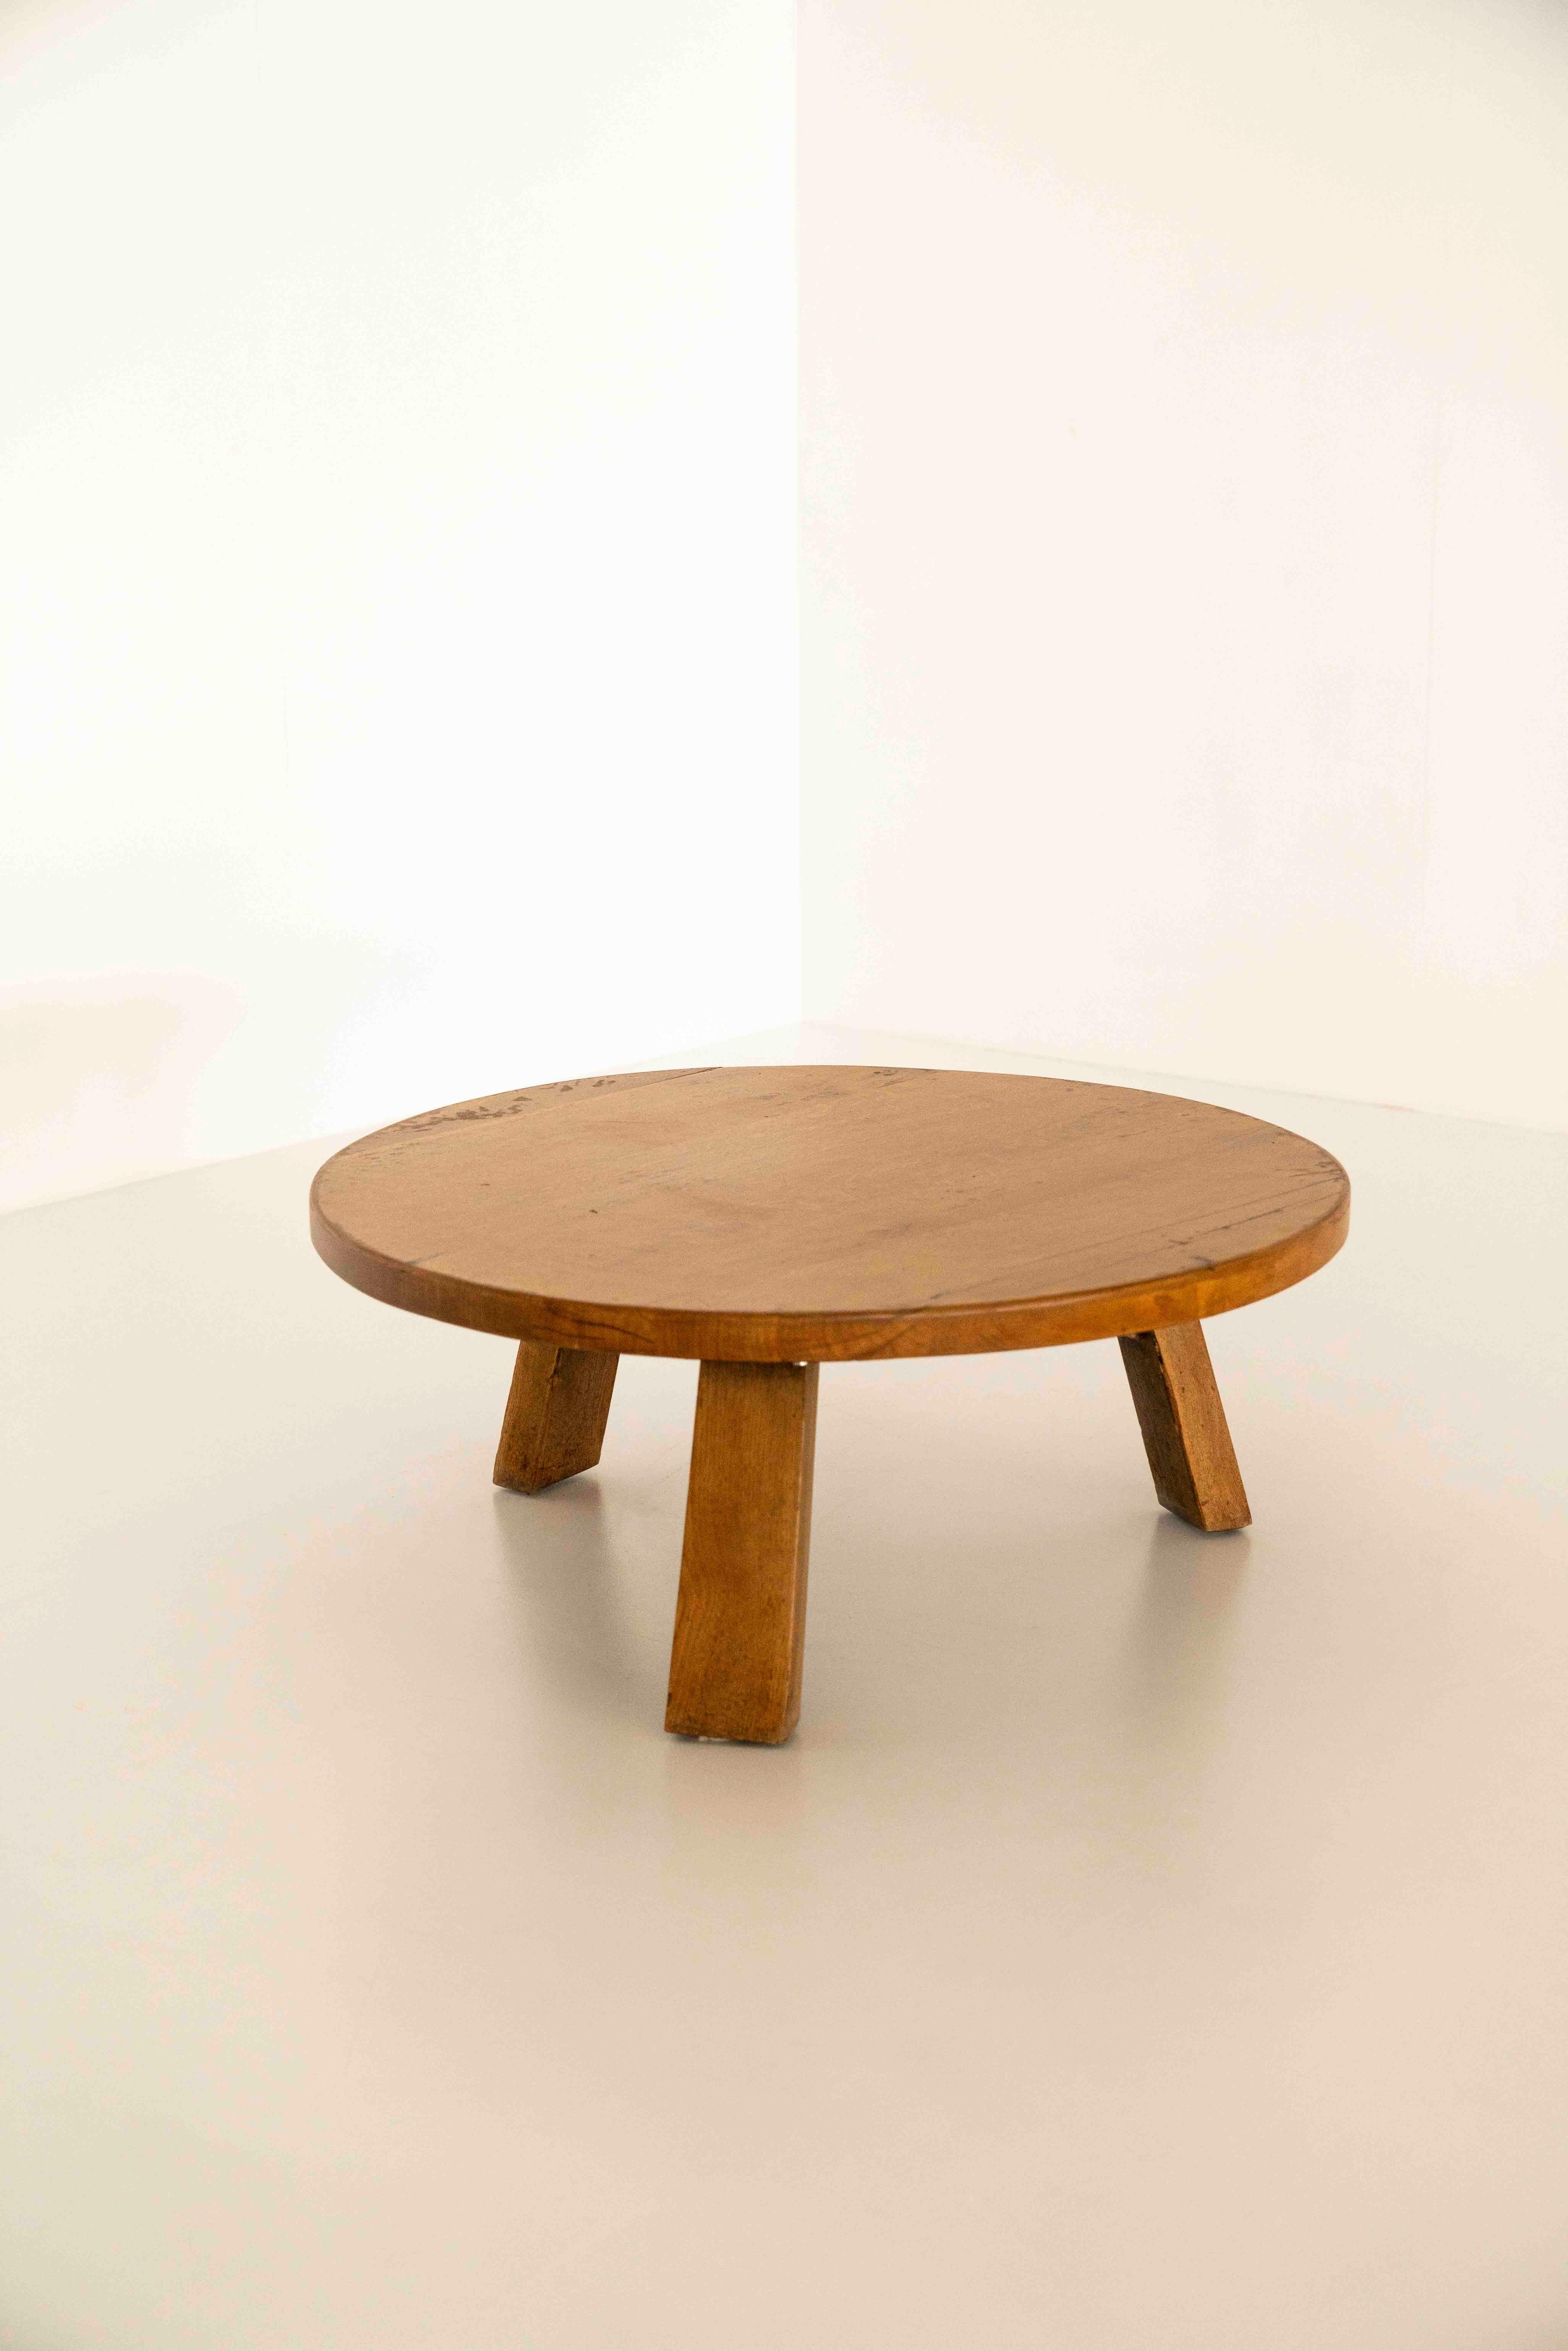 Dutch Round Oak Brutalist Coffee Table, The Netherlands 1970s